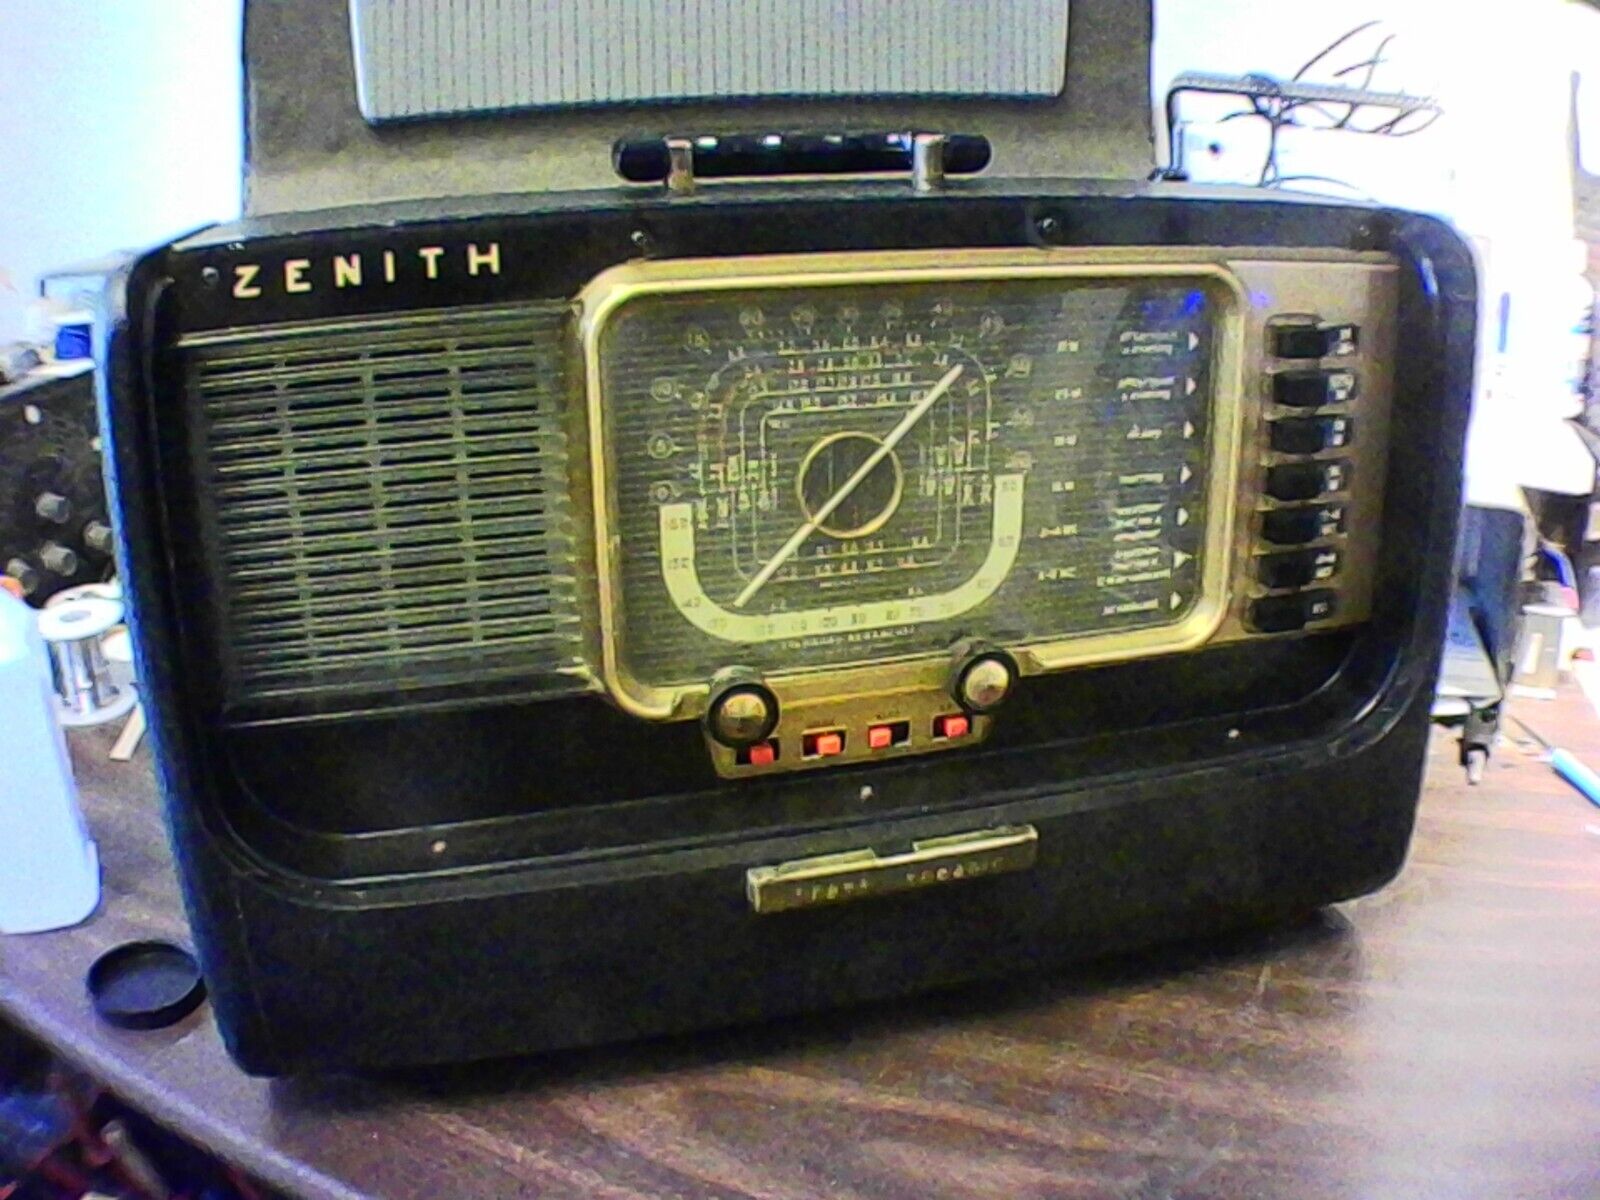 Zenith Transoceanic radio model H600. Pro recap and restoration. Performs well.